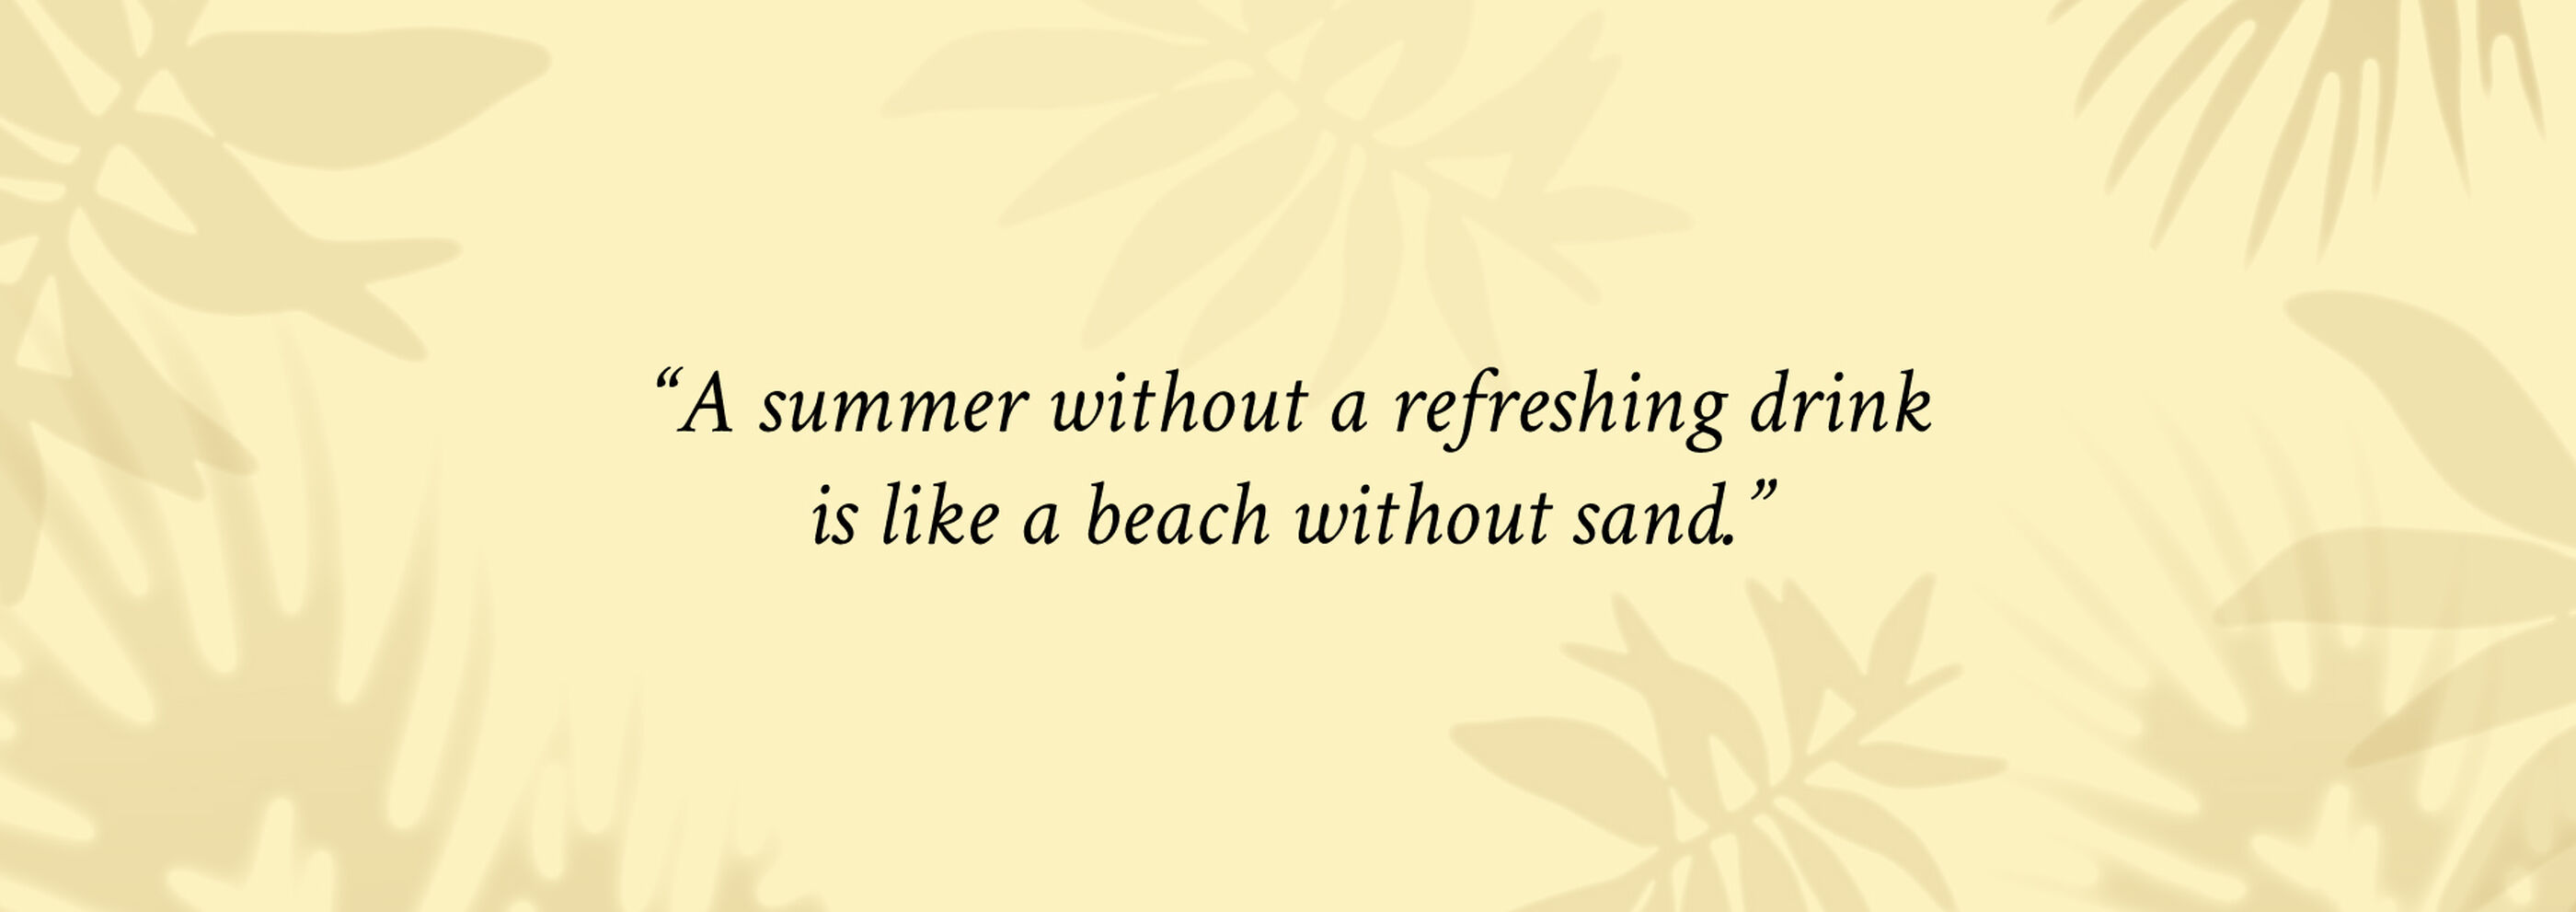 Summer without a refreshing drink is like a beach without sand quote on pale yellow background with palm silhouettes